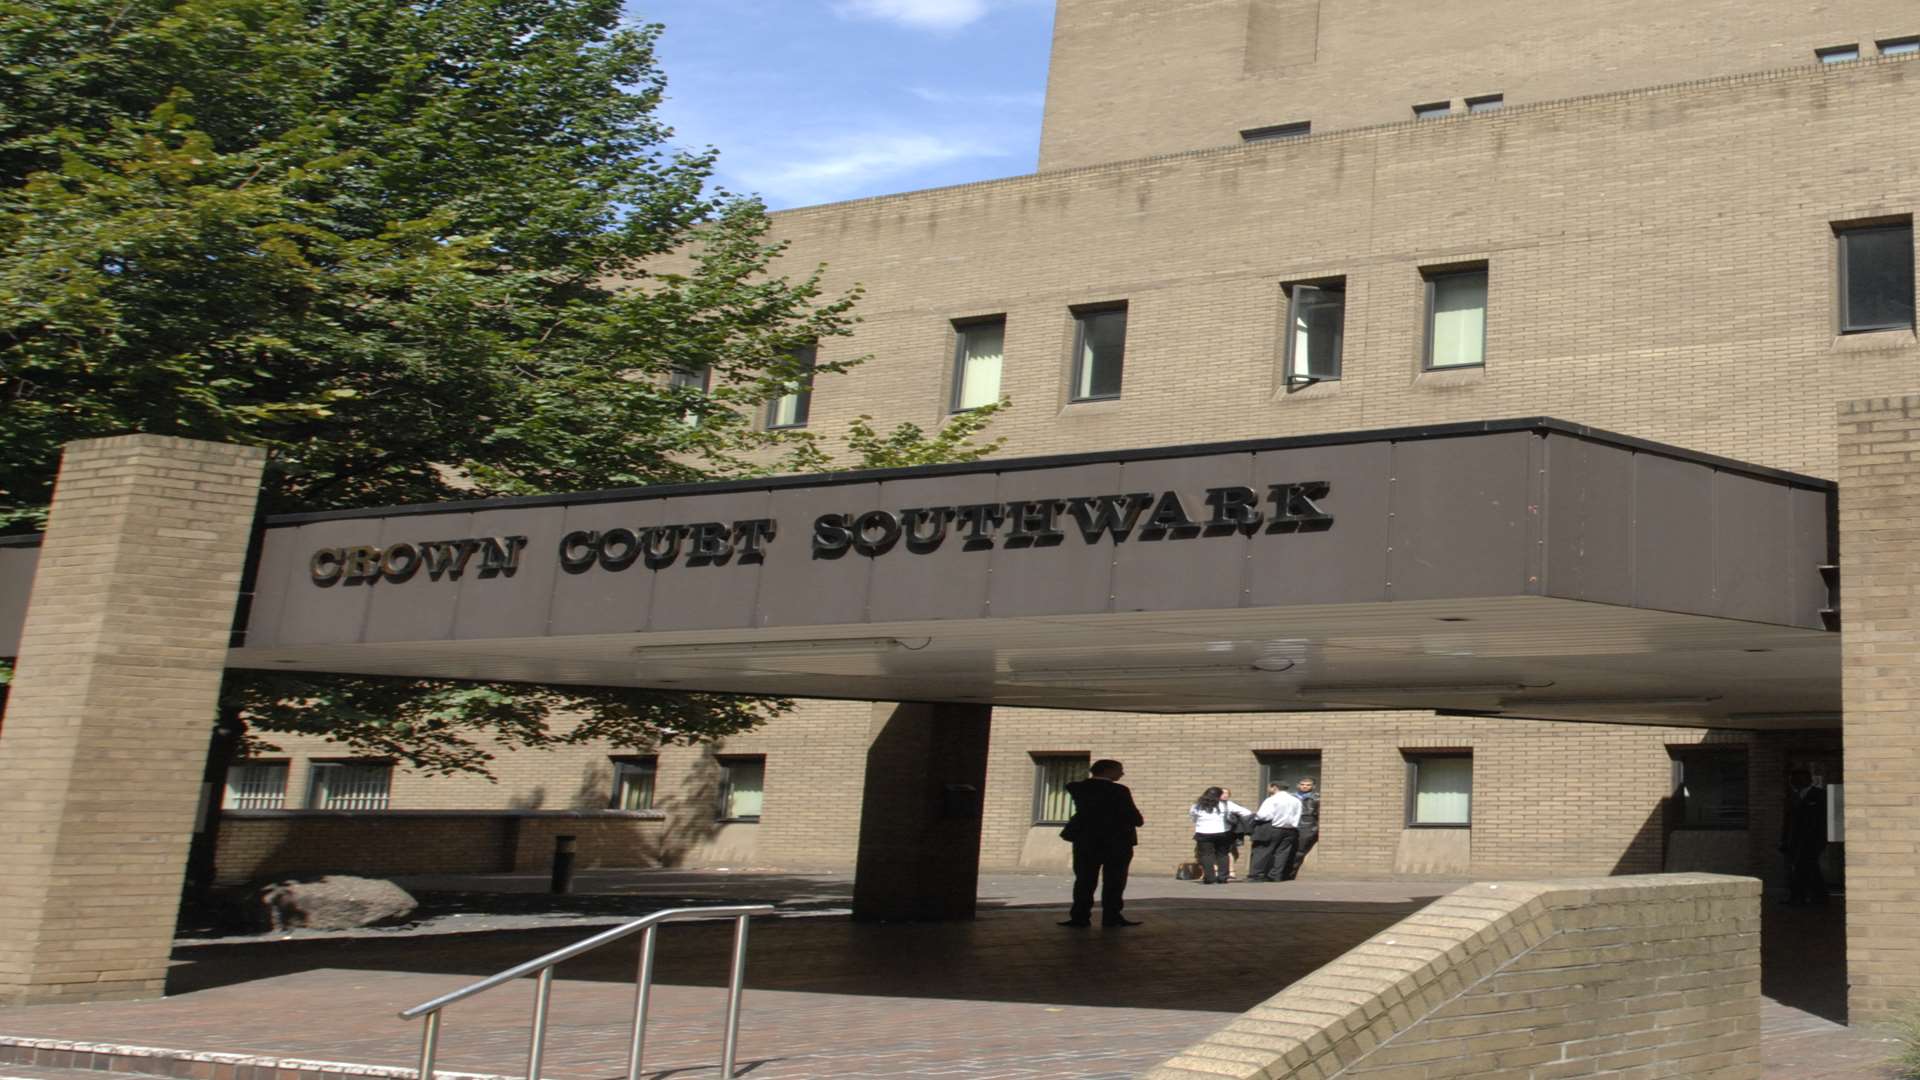 The trial is taking place at Southwark Crown Court